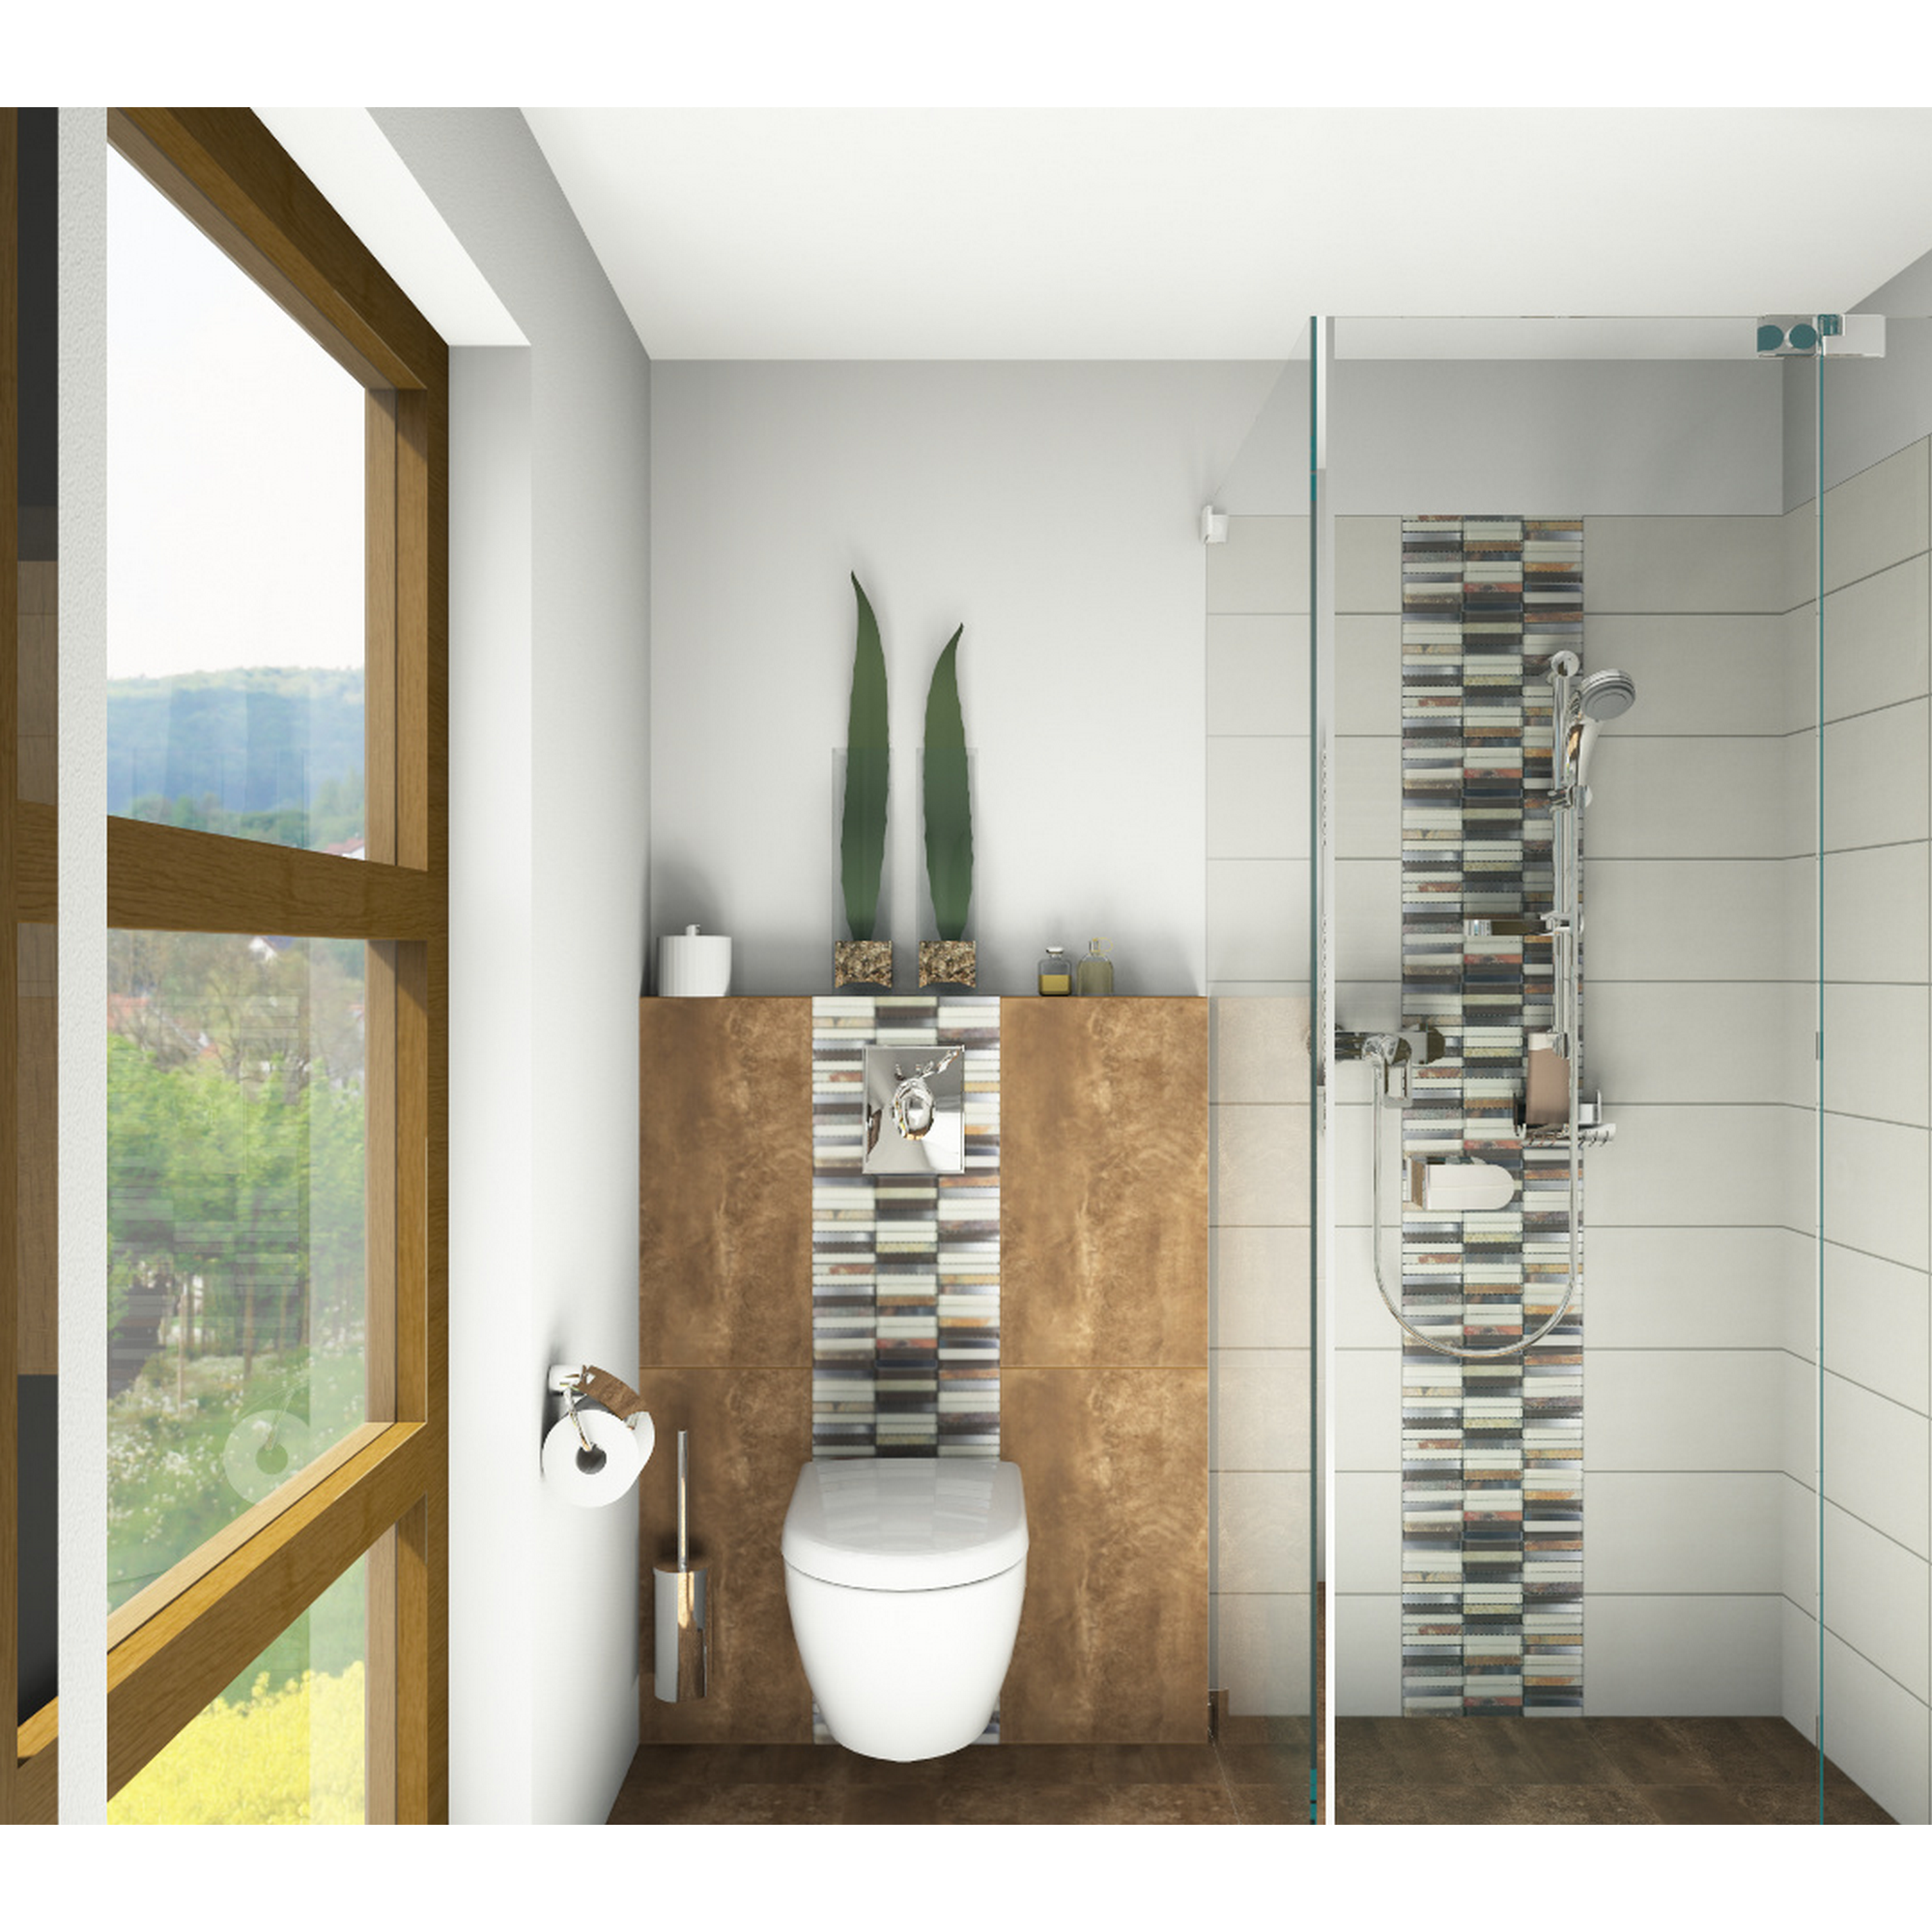 Mosaikfliese 'Rolling Hills' Materialmix beige-braun 30,5 x 30,5 cm + product picture